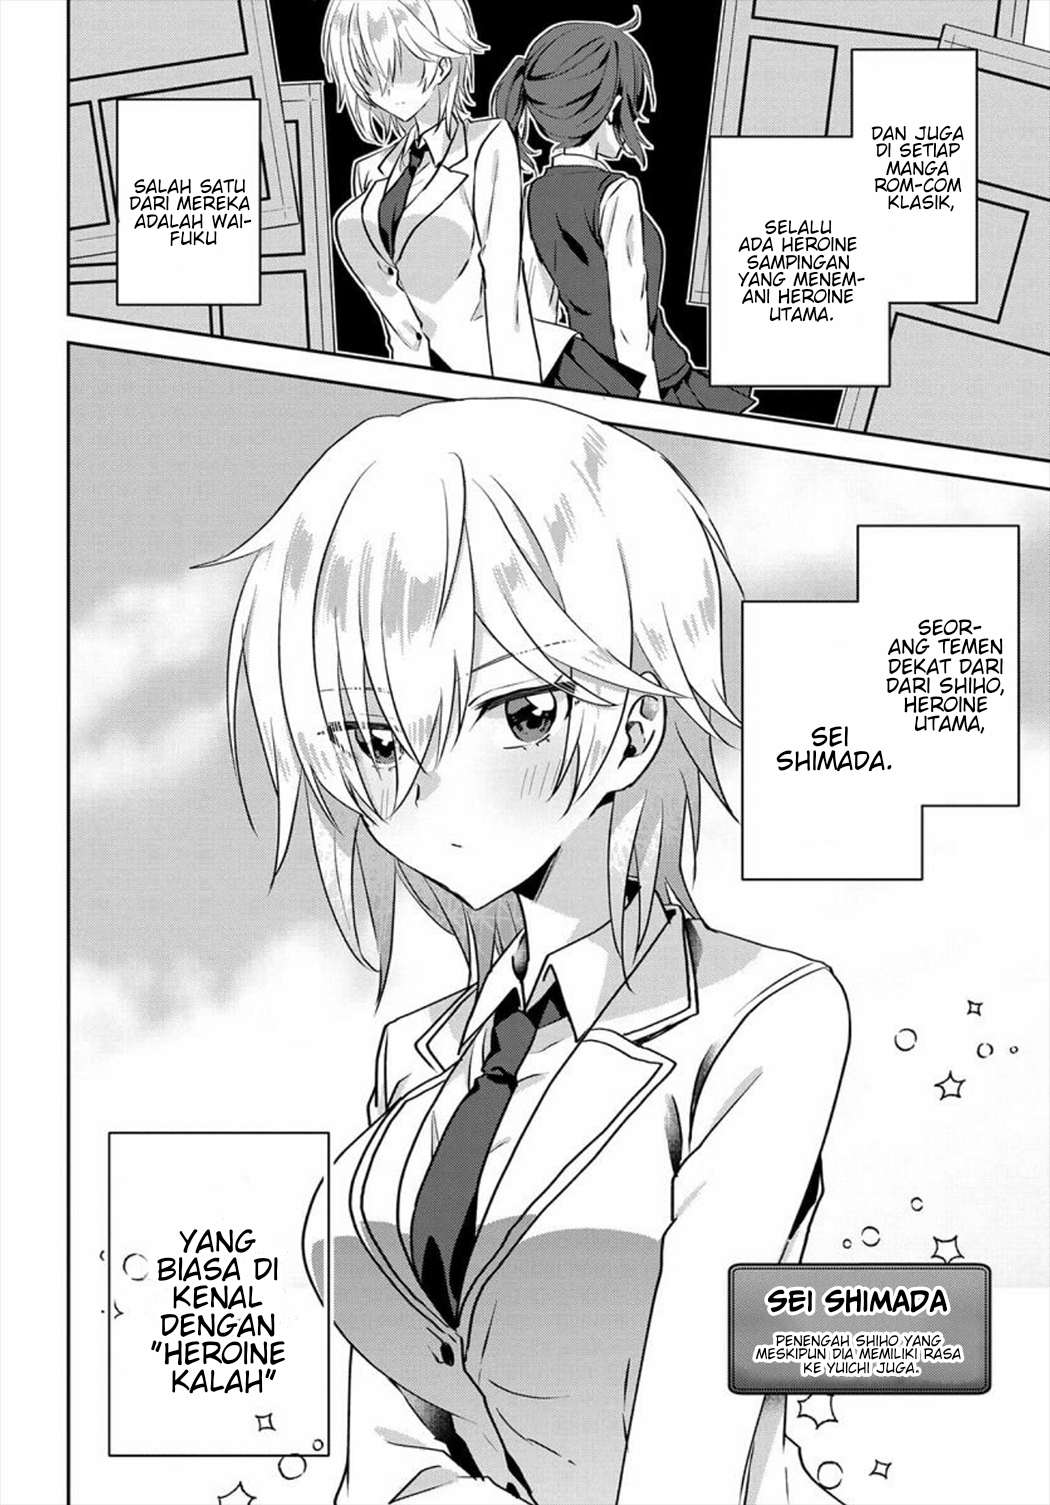 Since I'Ve Entered The World Of Romantic Comedy Manga, I'Ll Do My Best To Make The Losing Heroine Happy. Chapter 1 - 211